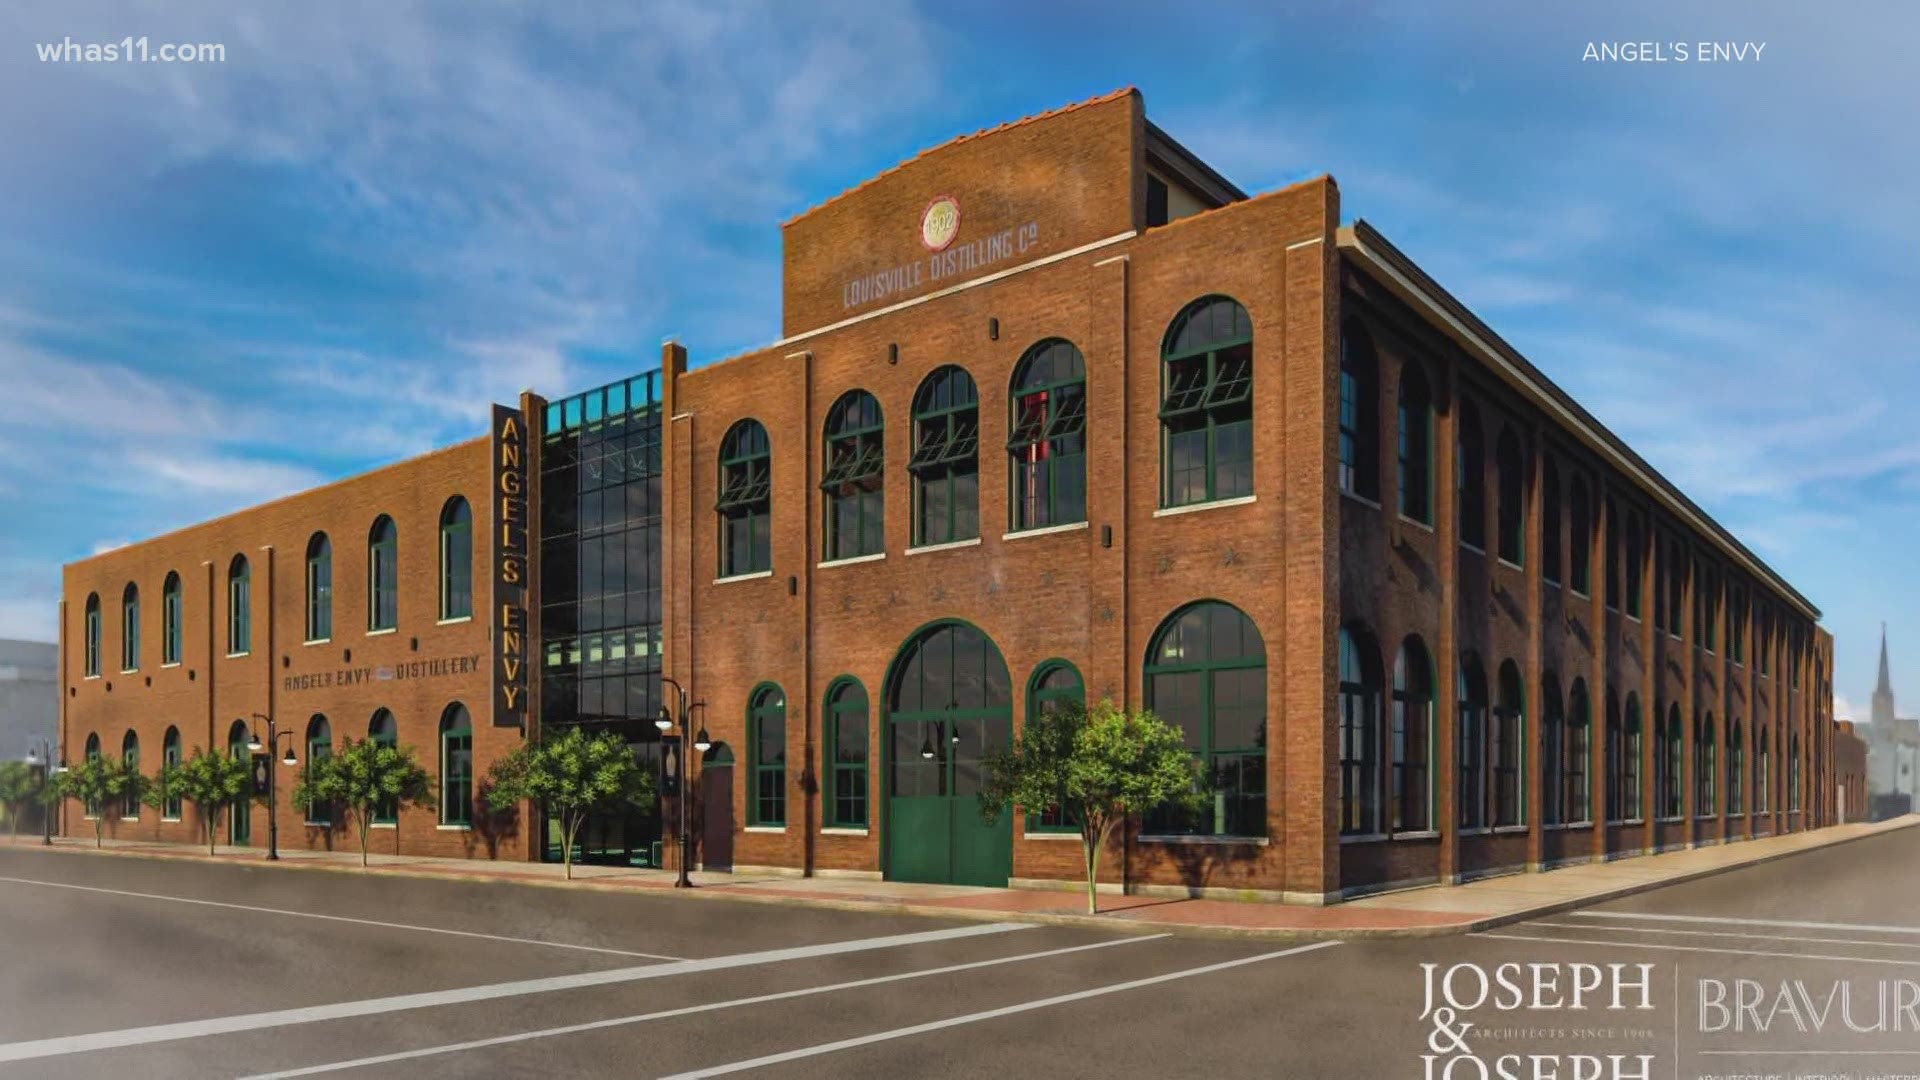 The 8.2 million project will add 13,000-square feet to the downtown facility and is expected to create 20 new jobs,.